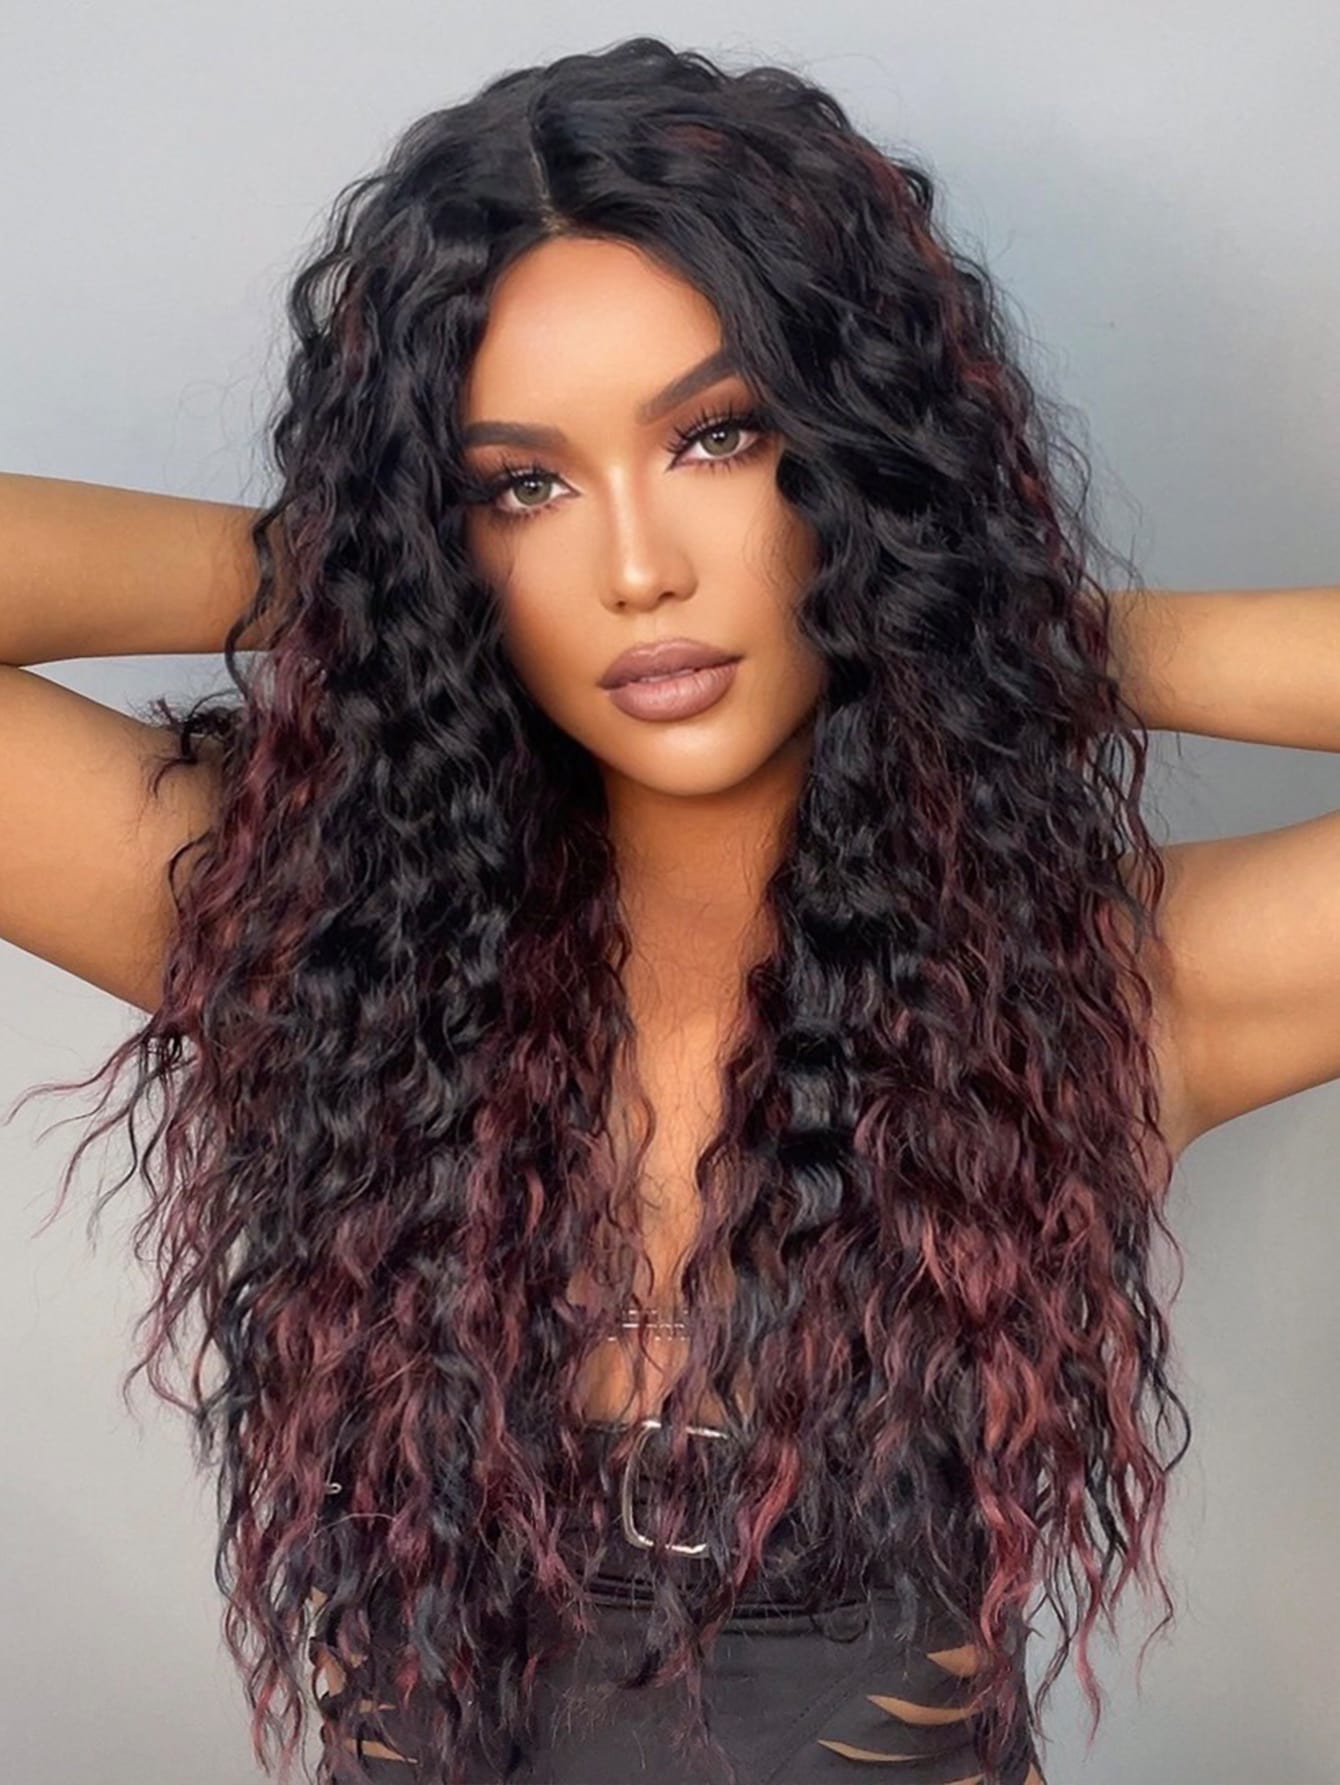 HAIRCUBE 13*4*1 T Part Lace Wigs, 26 And 30 Inch Long Ombre Black Red Wavy Curly Wigs Synthetic Lace Wigs For Party Daily Use